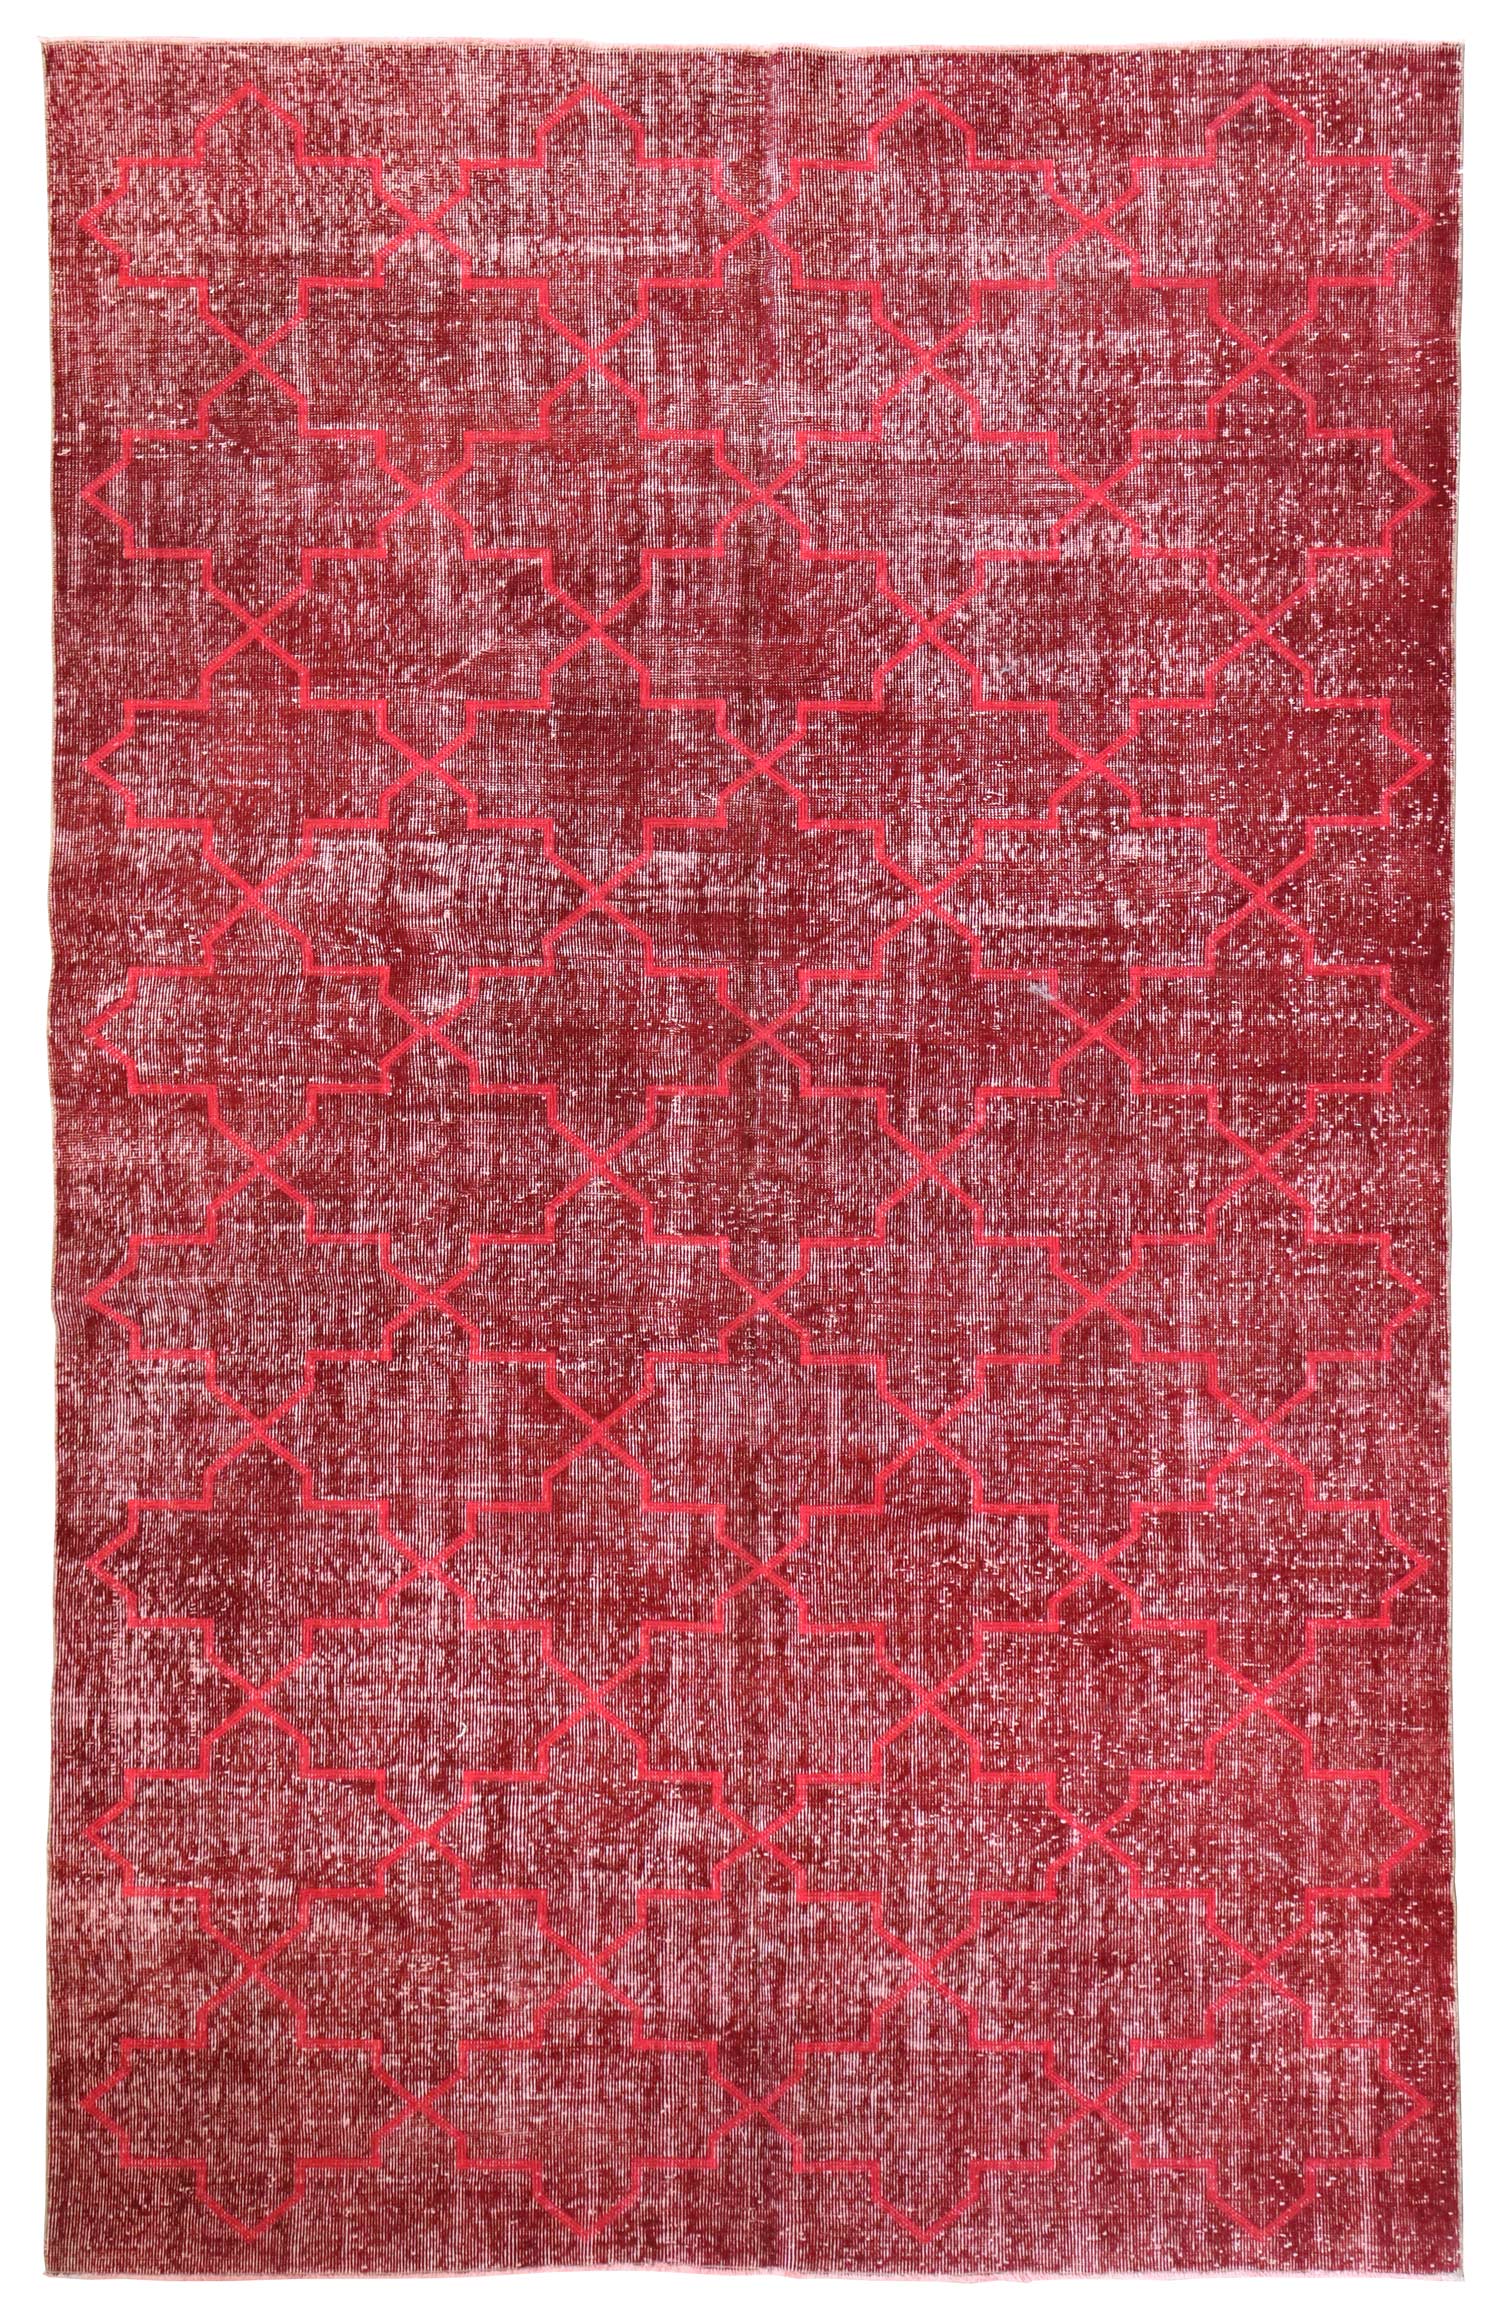 Vintage Embroidered Overdye Handwoven Contemporary Rug